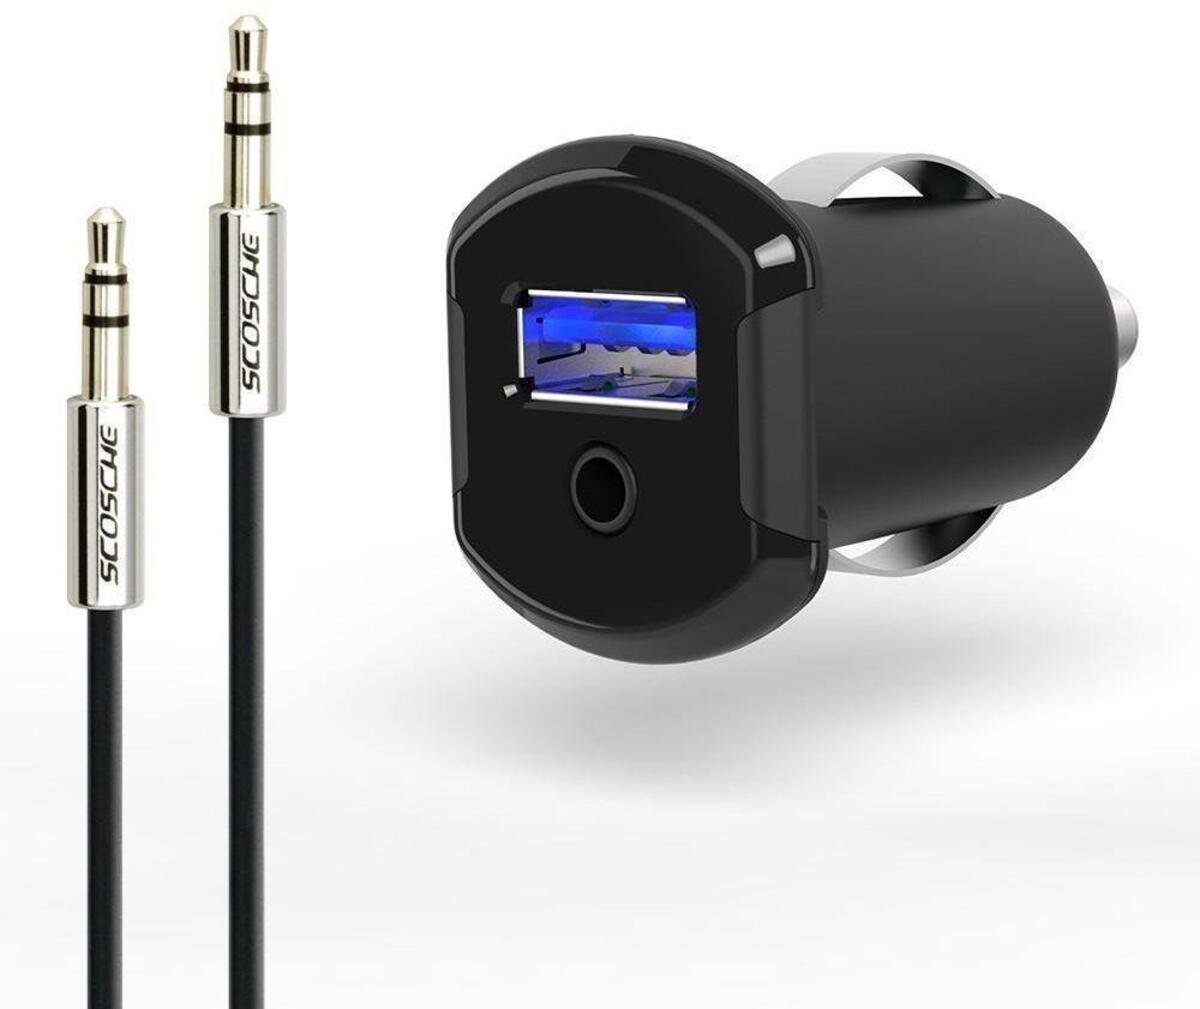 SCOSCHE Strike Drive AUX Converter and Charger For Lightning Devices